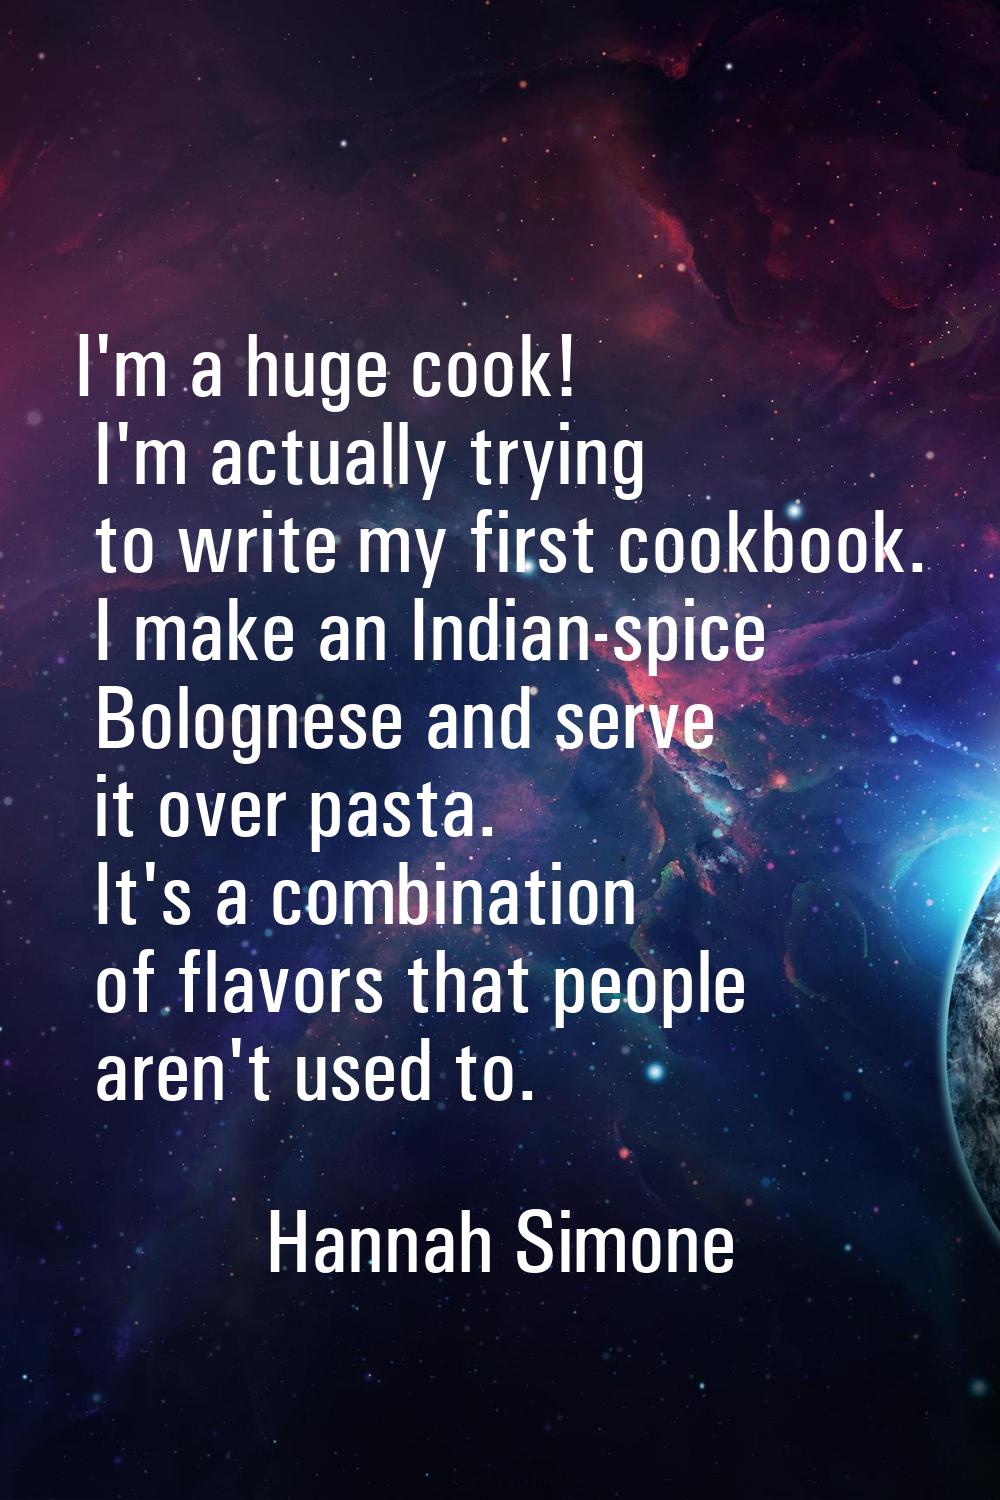 I'm a huge cook! I'm actually trying to write my first cookbook. I make an Indian-spice Bolognese a